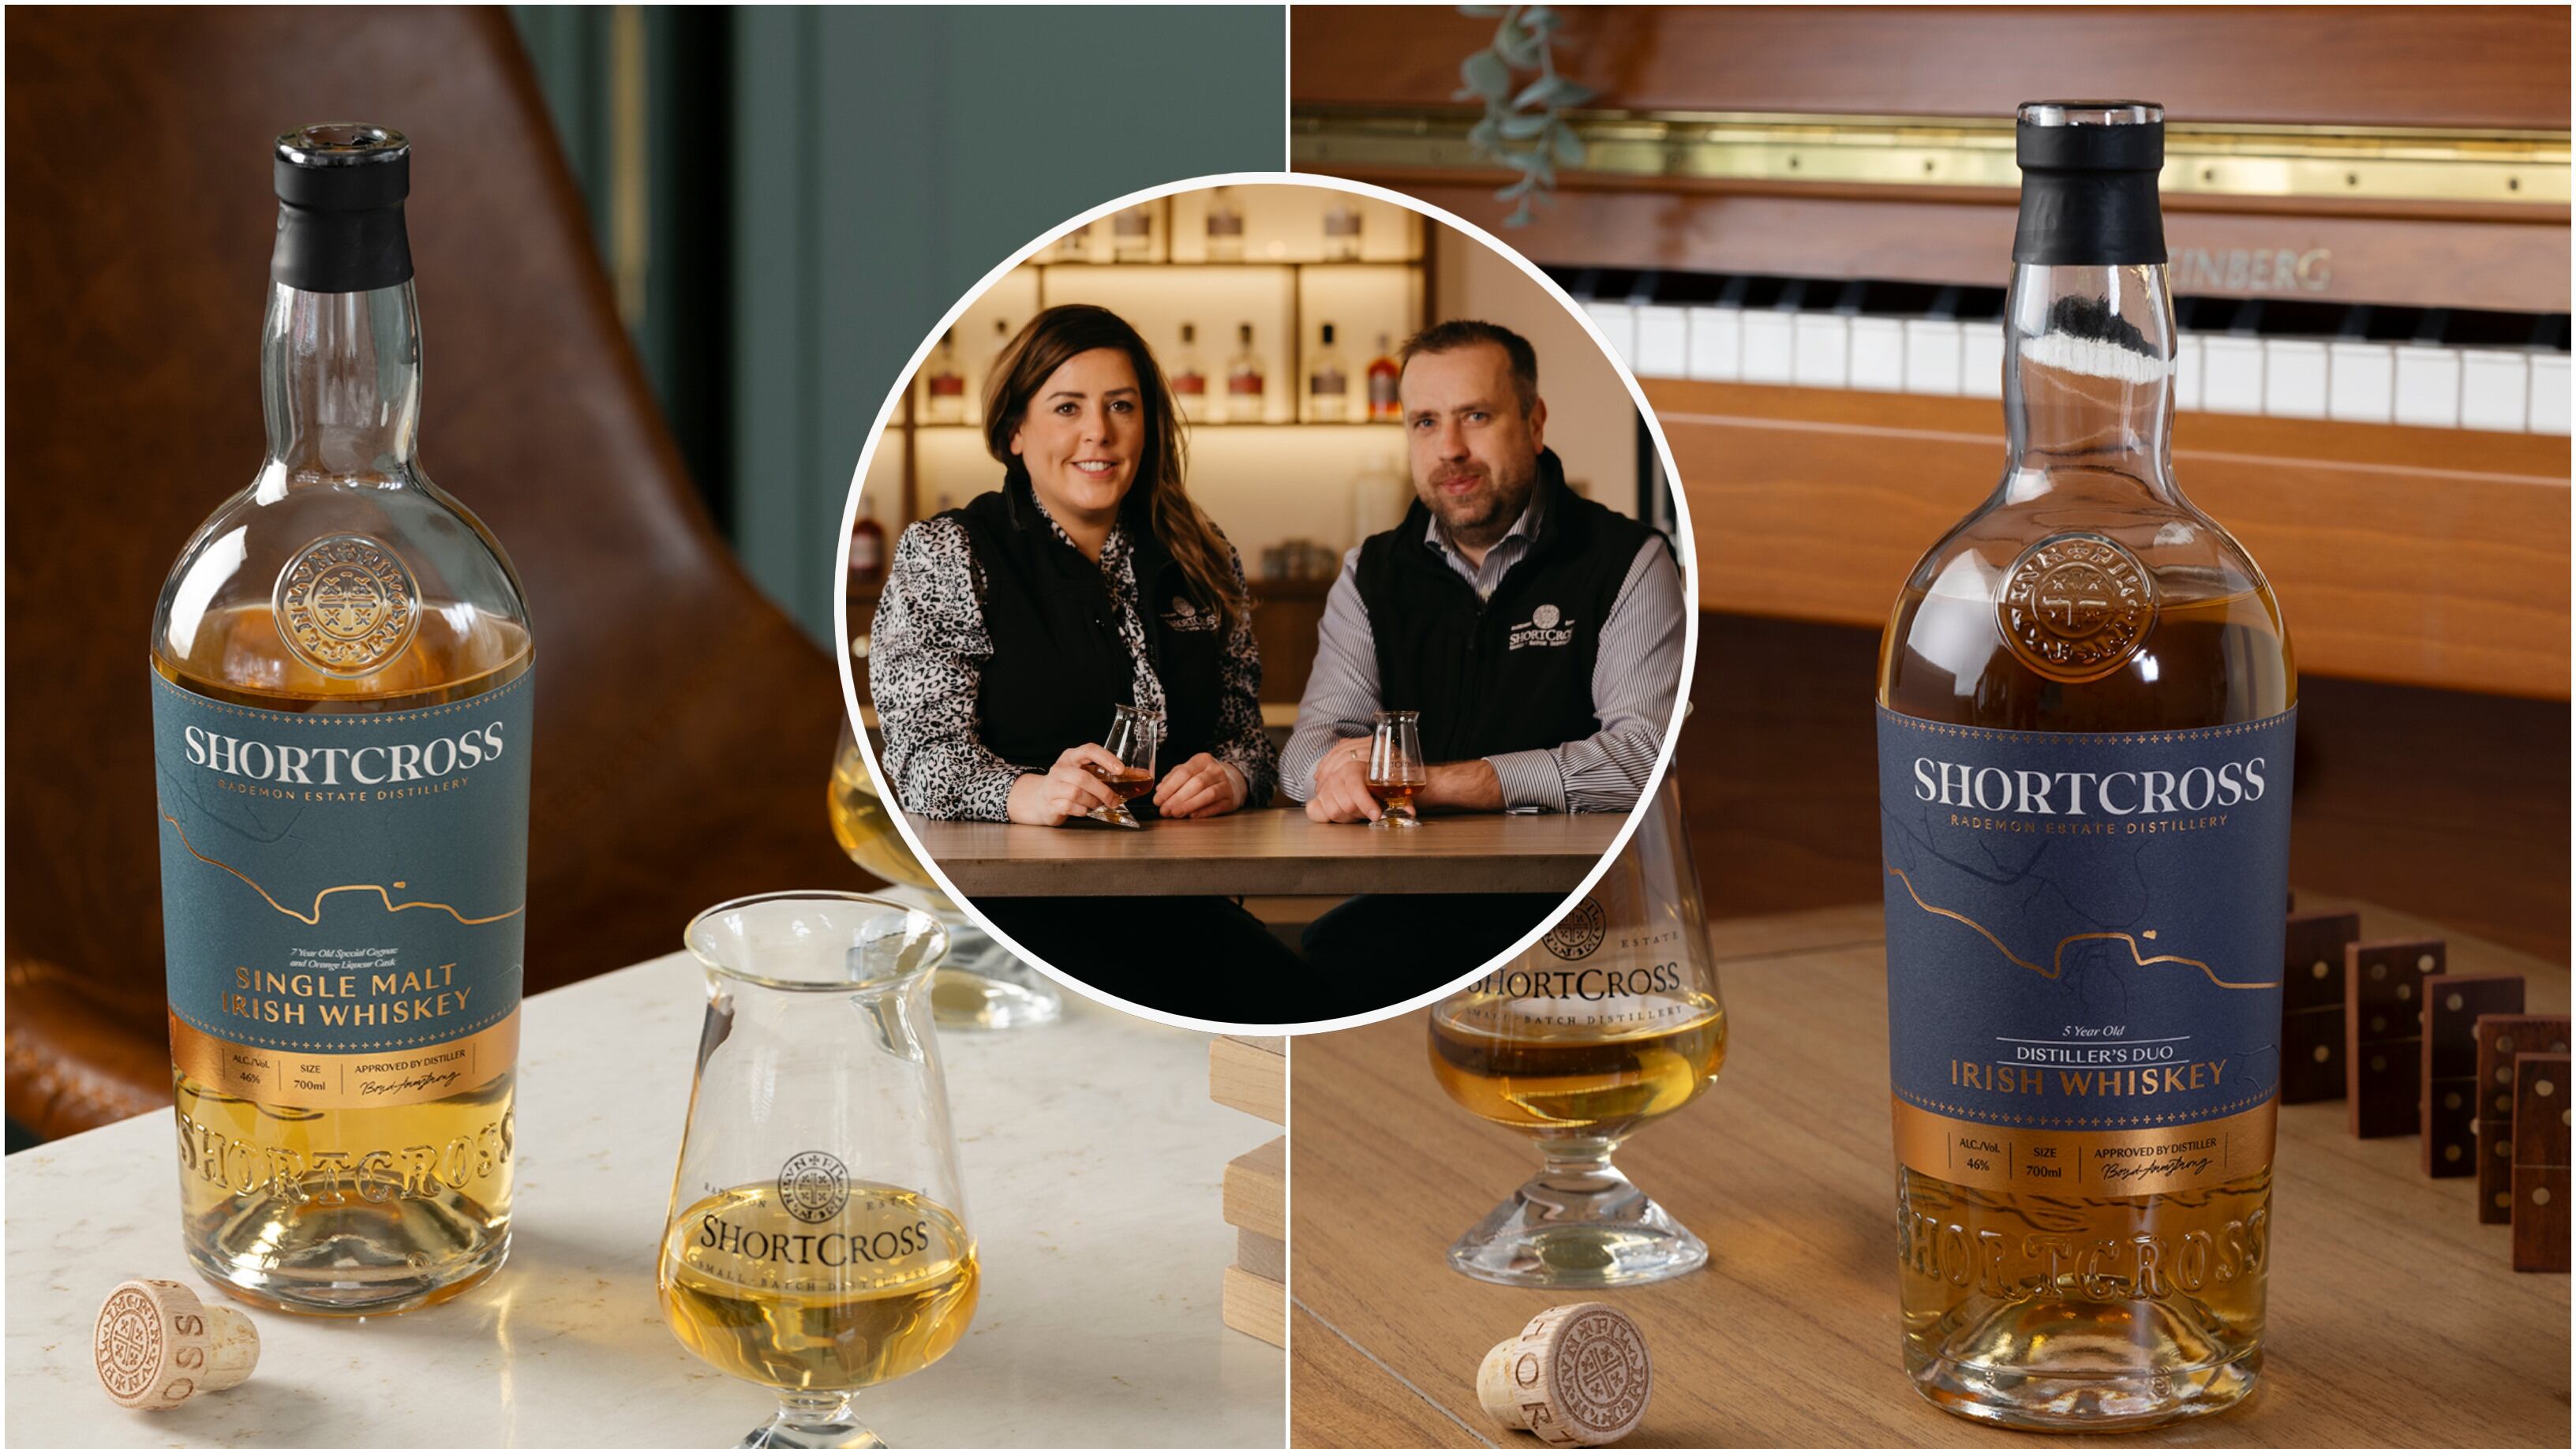 Founders of the Rademon Estate Distillery, Fiona and David Fiona Boyd-Armstrong (inset), with their latest Shortcross Irish Whiskey releases: A 7-year-old peated single malt (left) and the 5-year-old Distiller’s Duo (right).